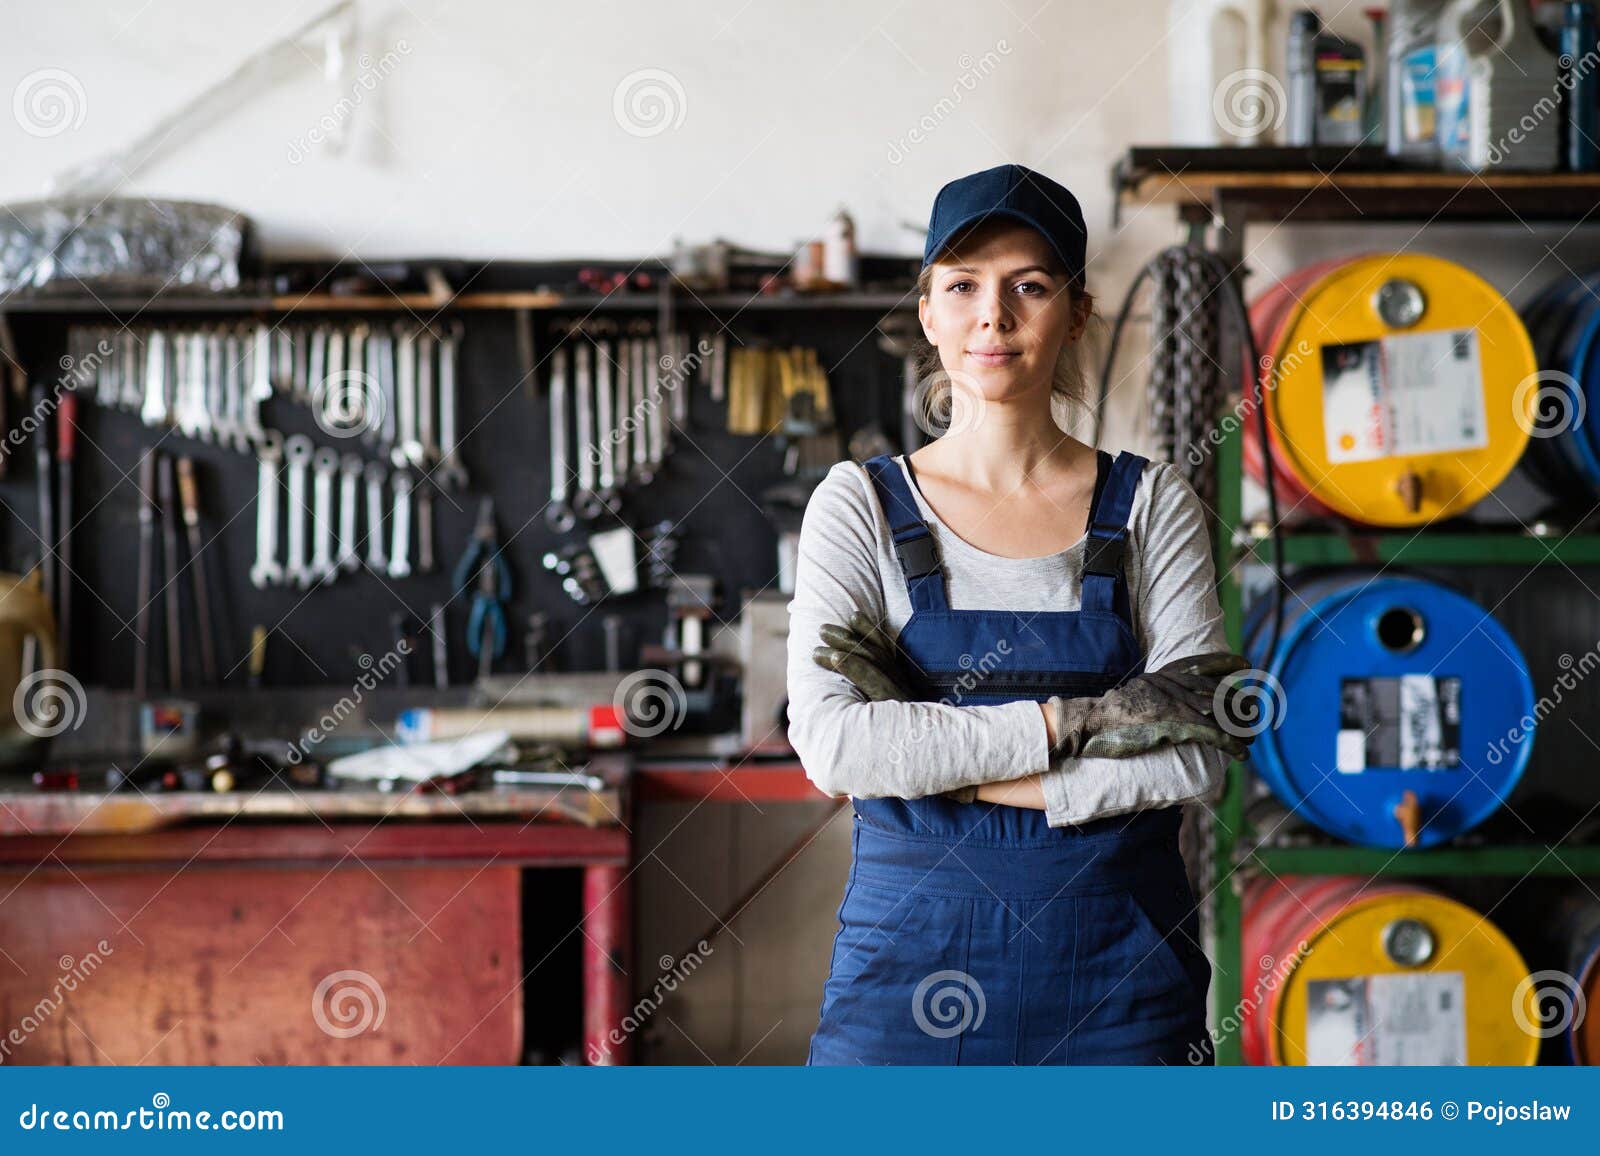 female auto mechanic repairing, maintaining car. beautiful woman standing in a garage, wearing blue coveralls.